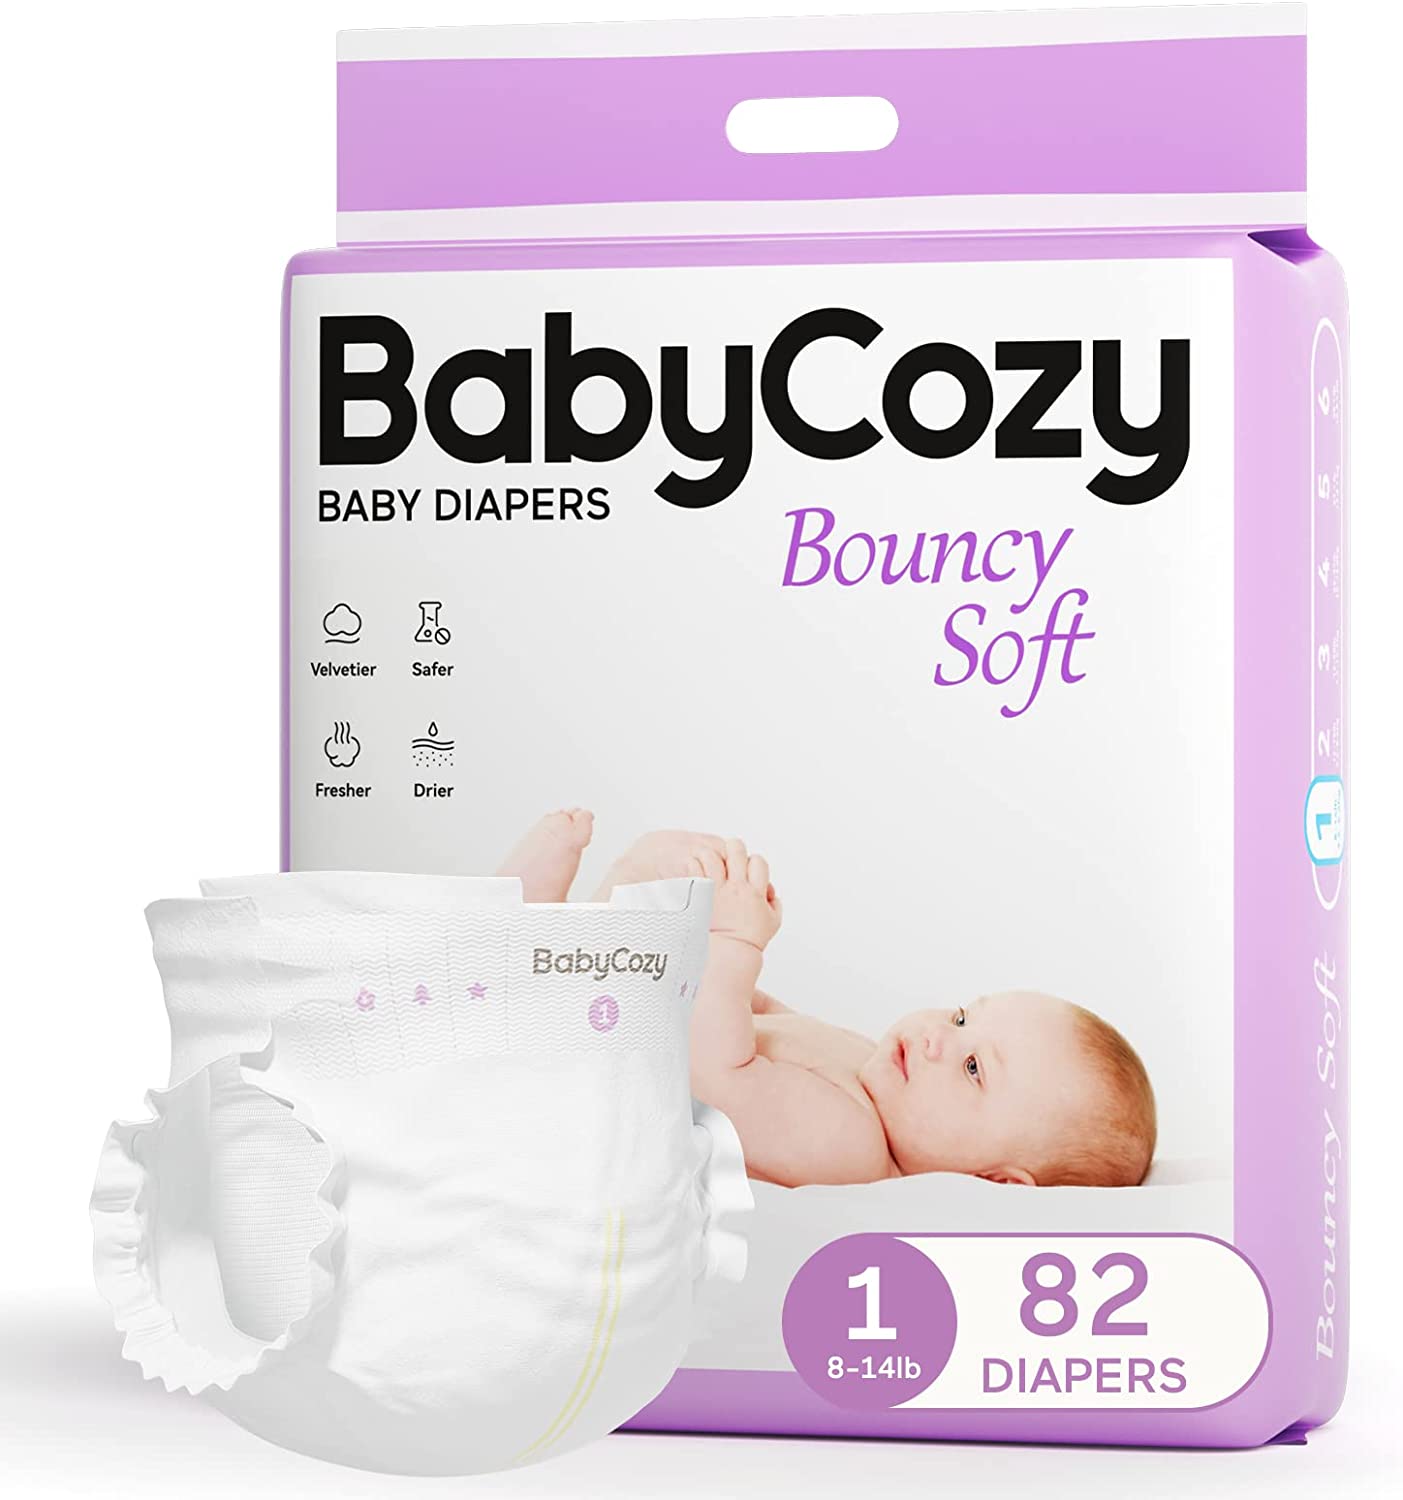 Newborn Baby Diapers Size 1(8-14lb) 82 Count,Babycozy Bouncy Soft Diapers Fit Baby Preemie, Dry Disposable Diapers Hypoallergenic Without Chlorine Safe for Sensitive Infant Skin